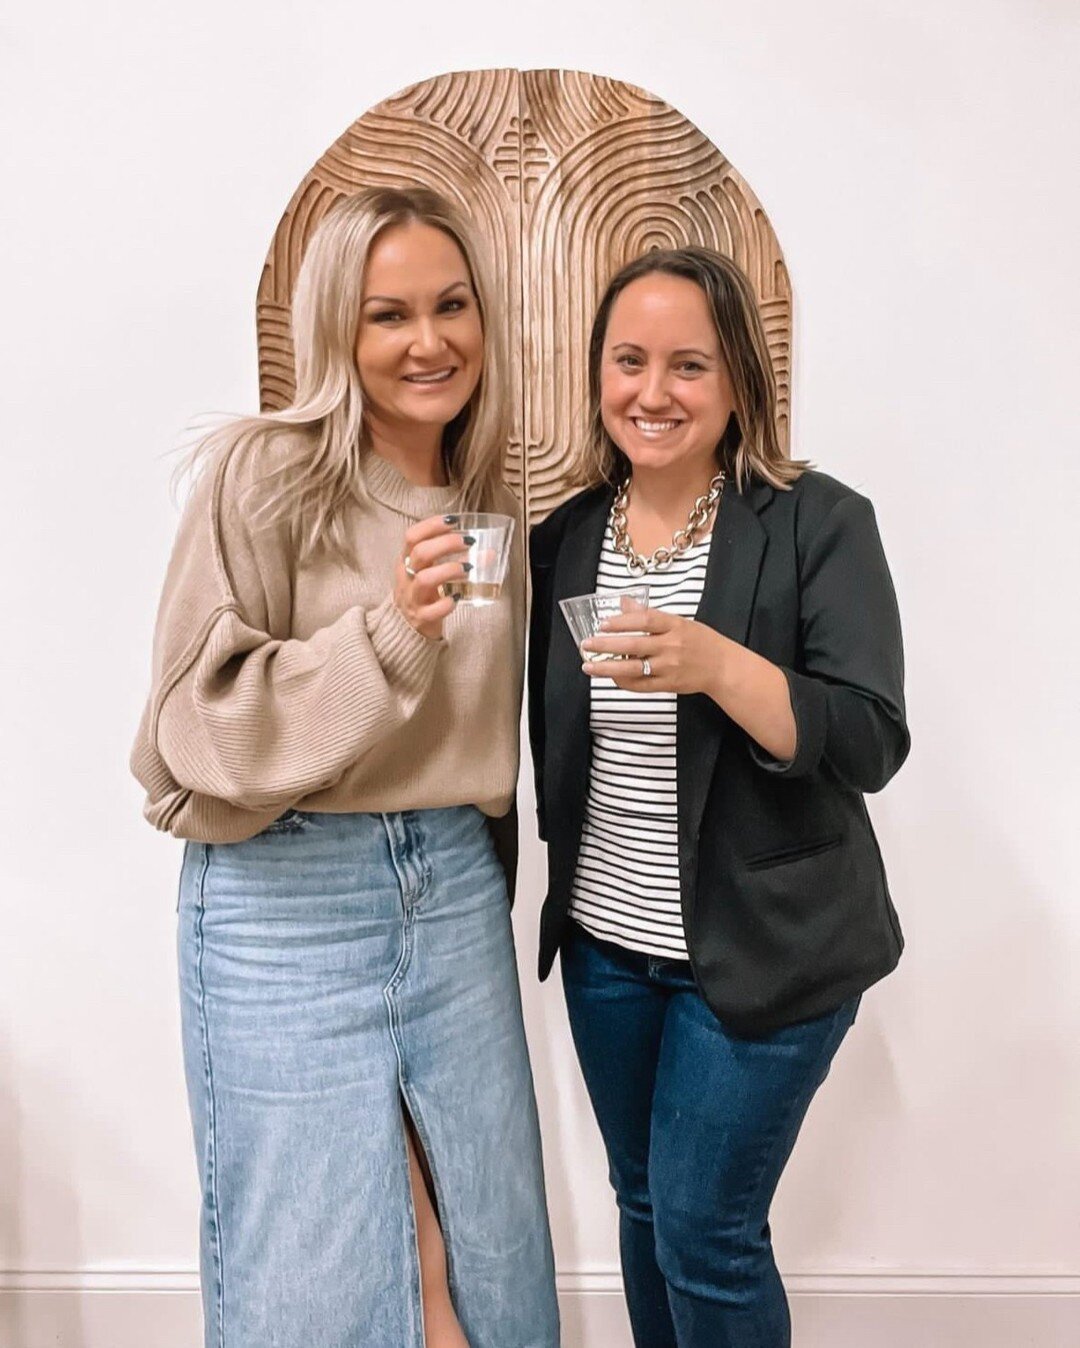 My heart is SO full! 🥰

I had an amazing time co-hosting an evening of mixing and mingling for fellow business owners in my community with my business bestie Laura from @ShopQuaintrelleBoutique!

Thank you SO much to everyone who came out, we had so